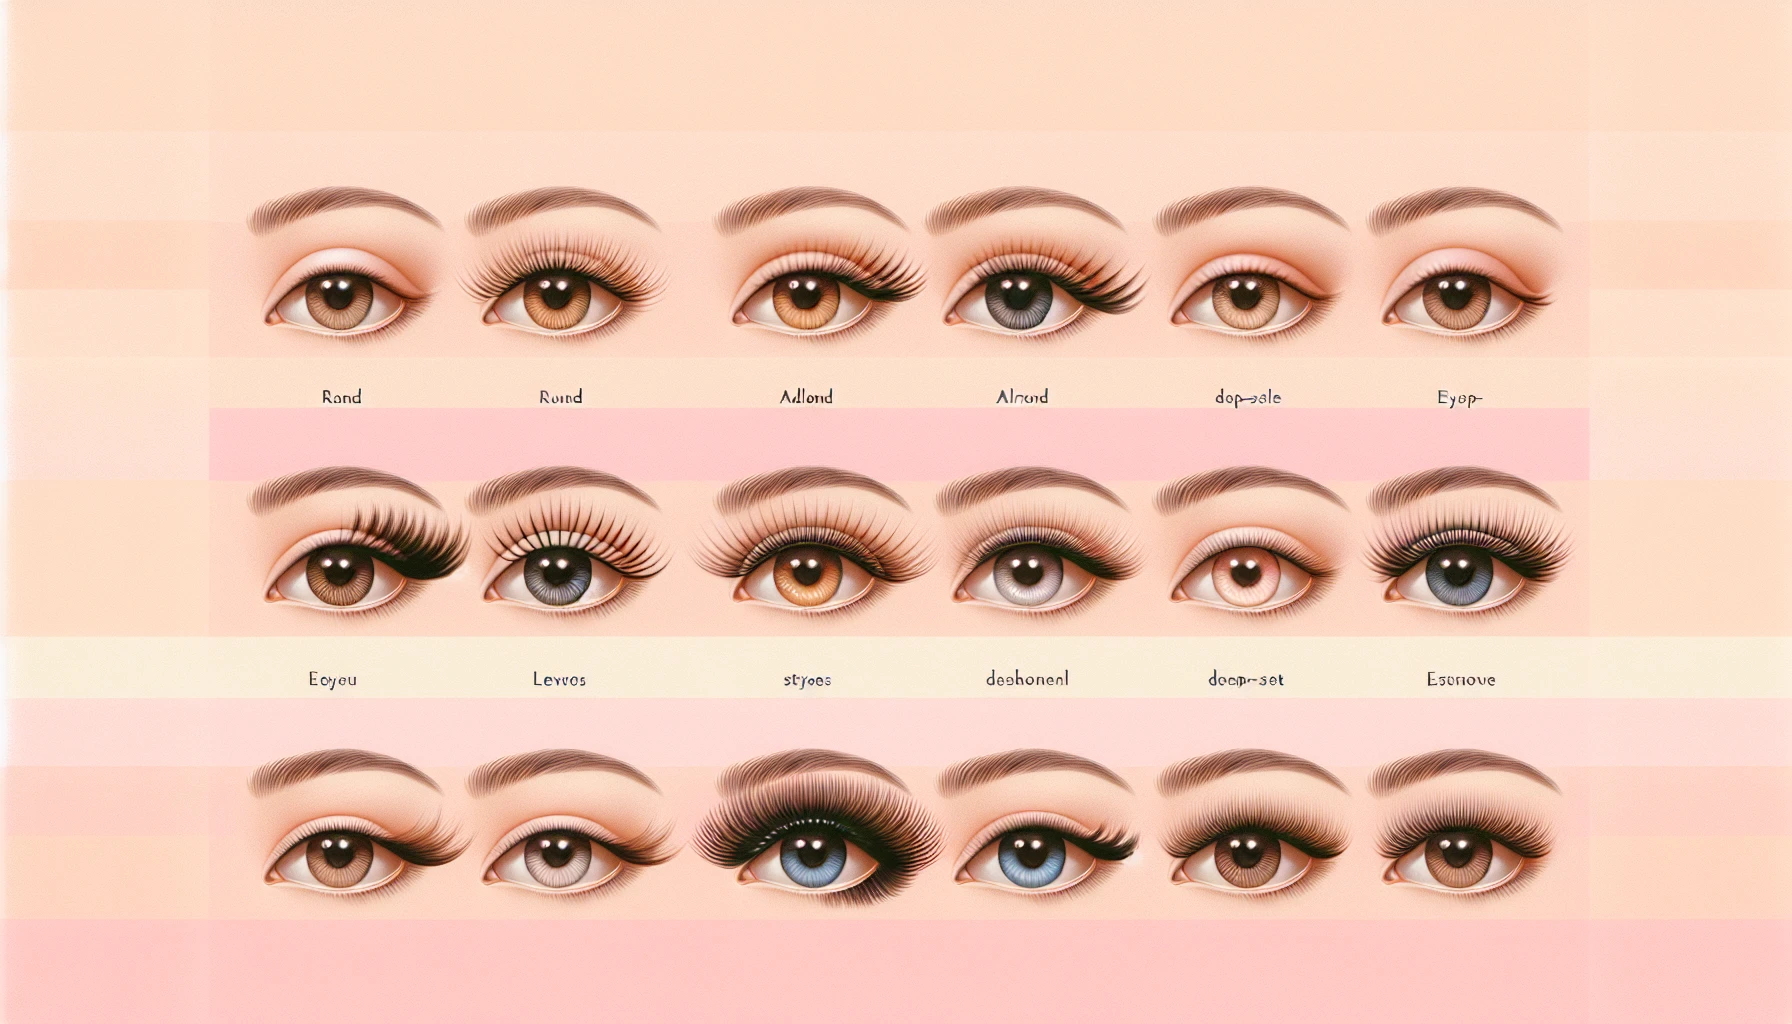 Different eye shapes with various eyelash styles